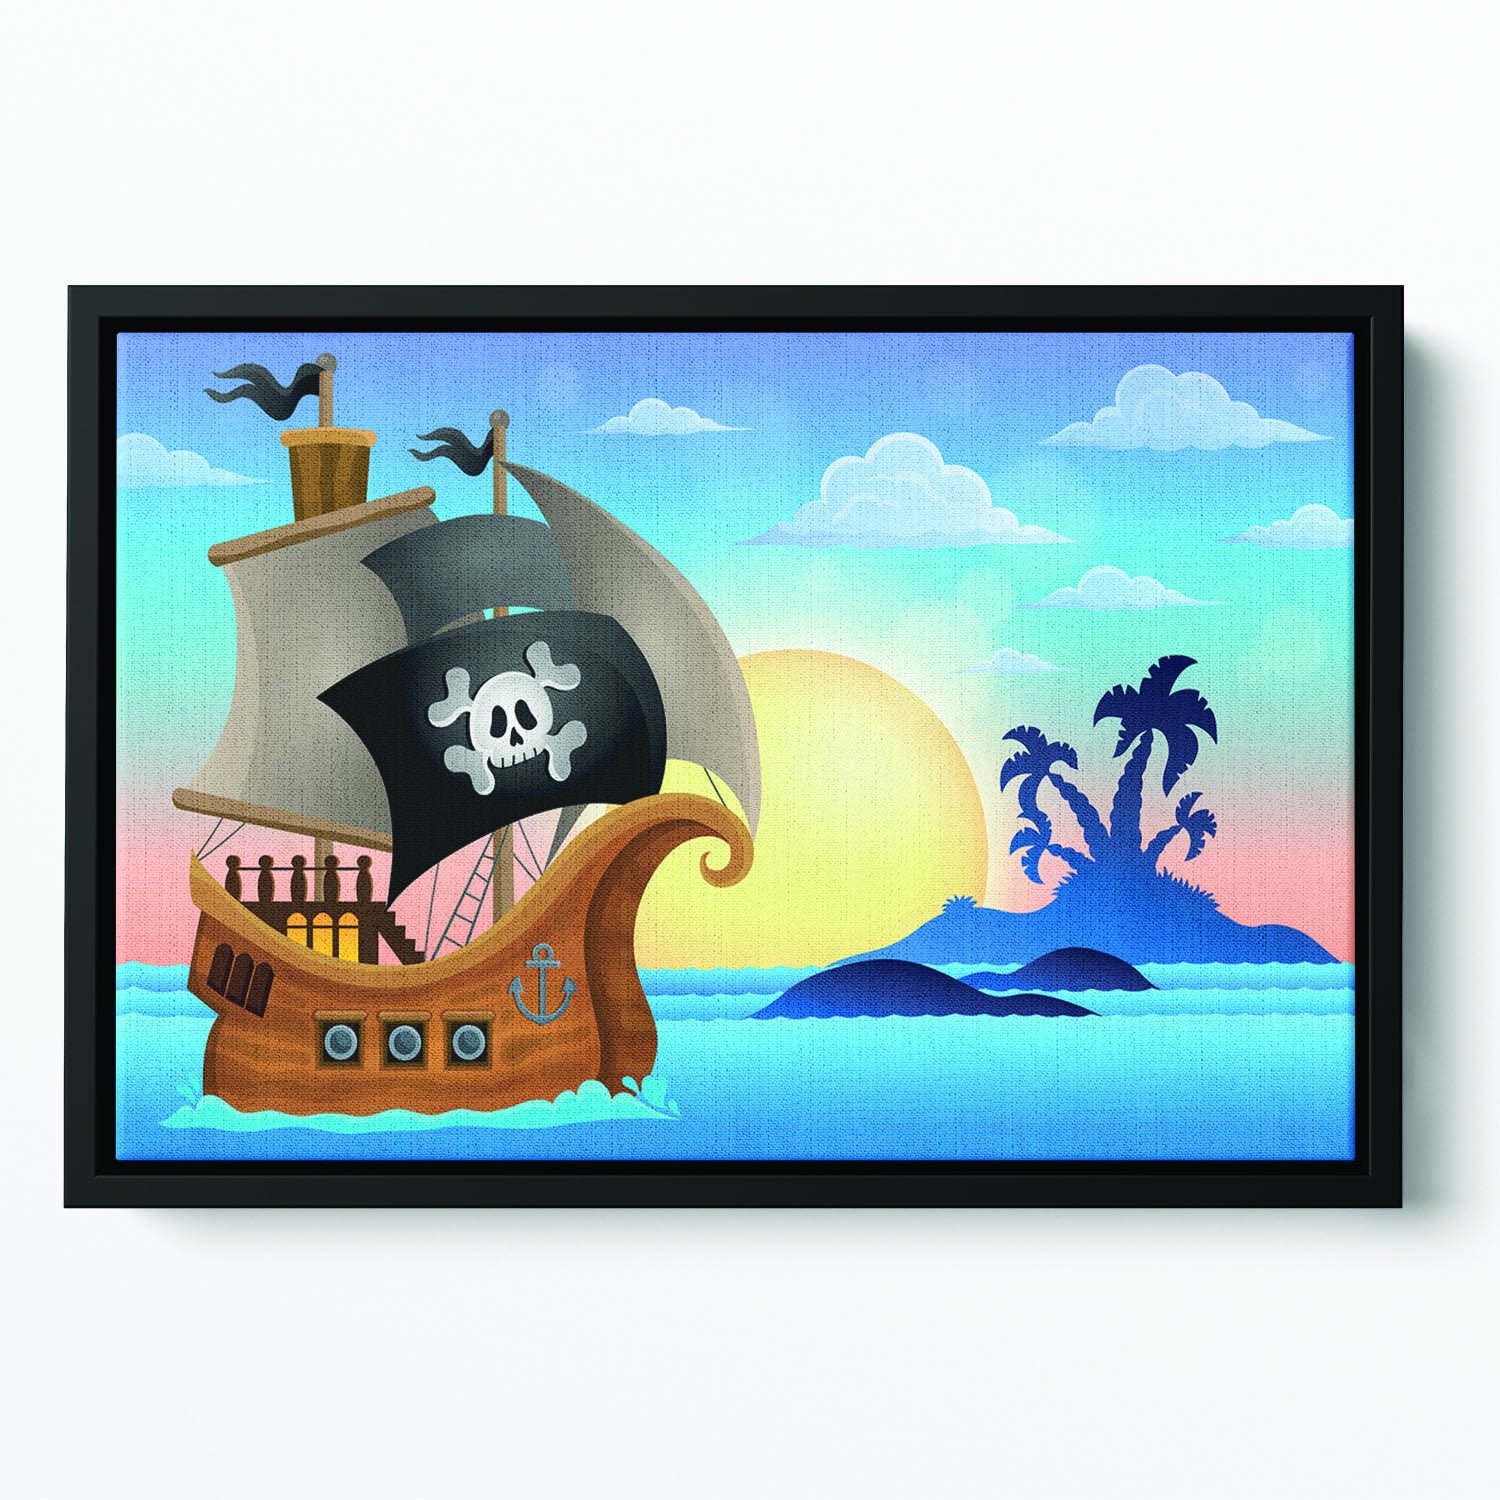 Pirate ship near small island 4 Floating Framed Canvas